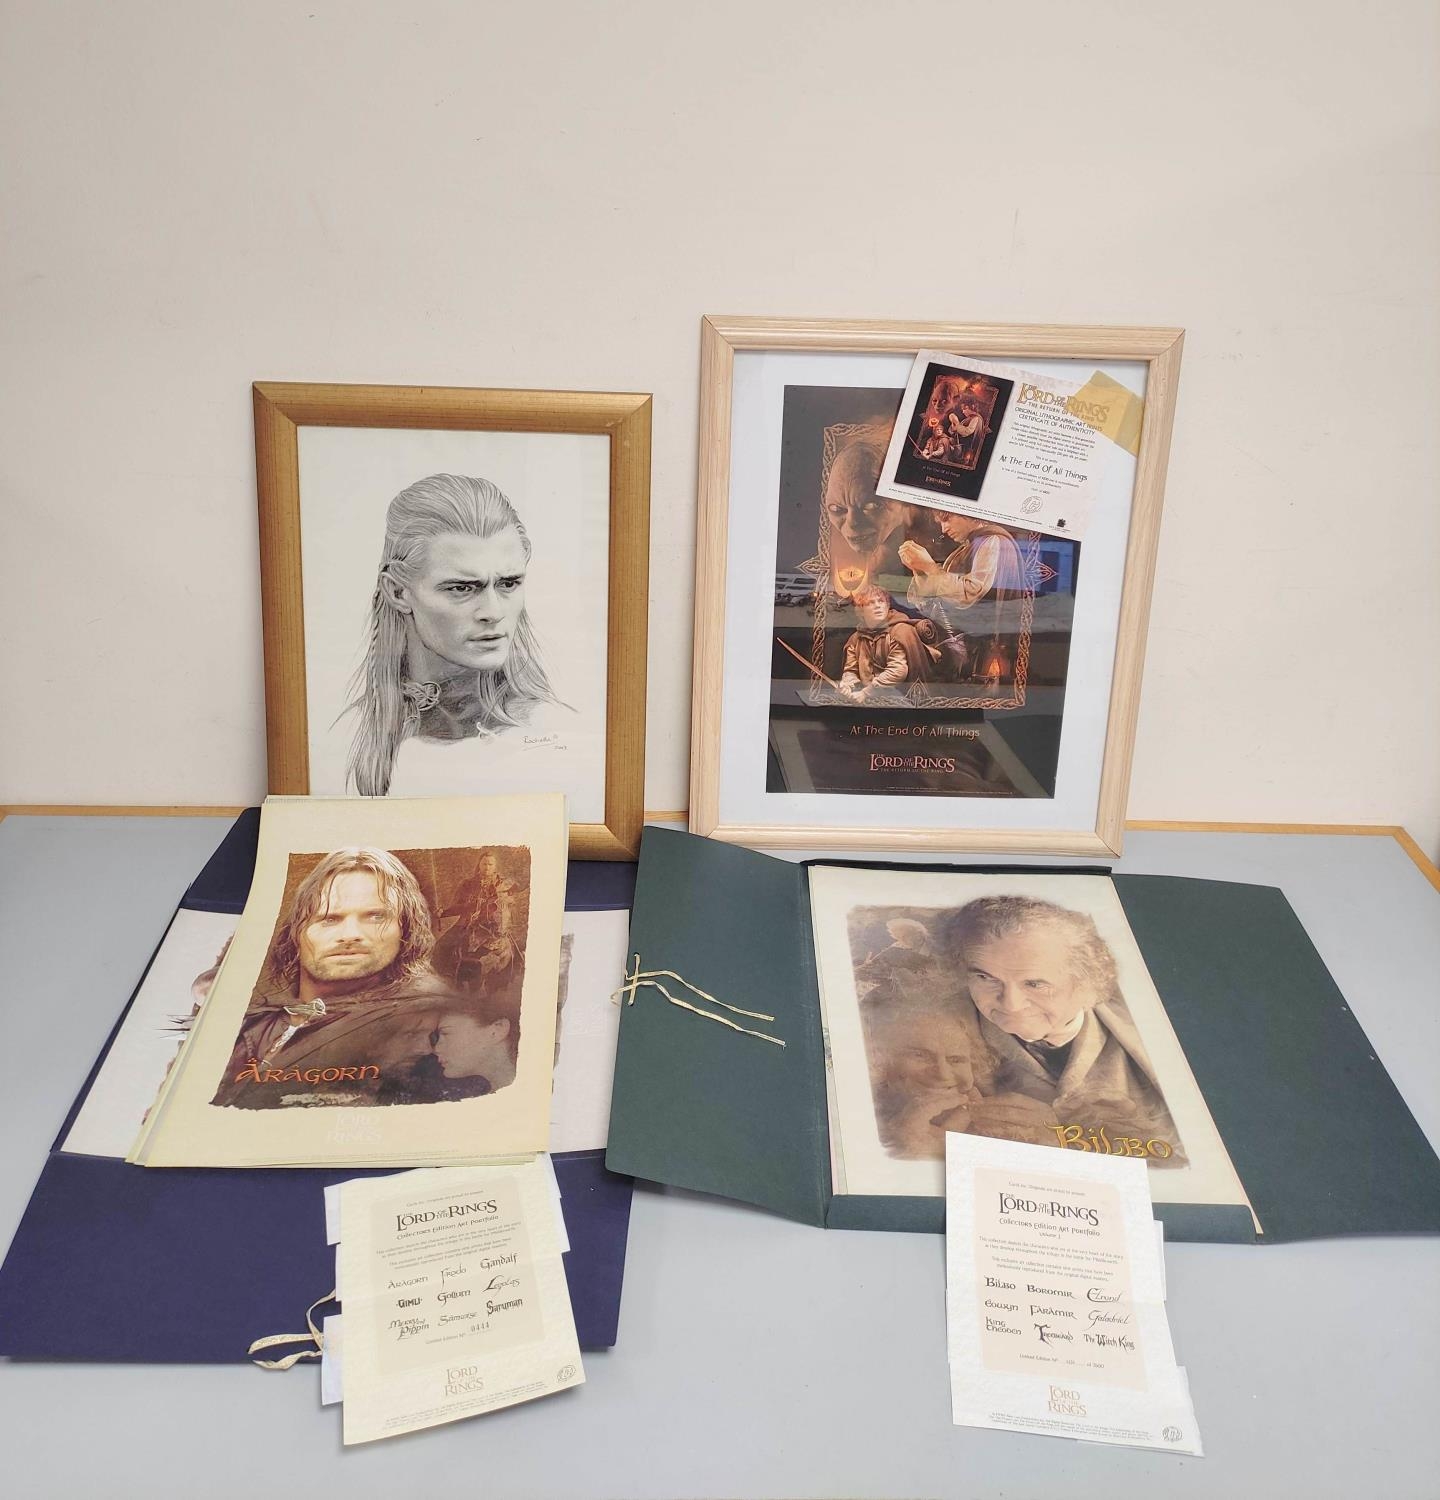 Lord of the Rings. Artwork to include two limited edition Art Portfolios by Cards Inc, a limited